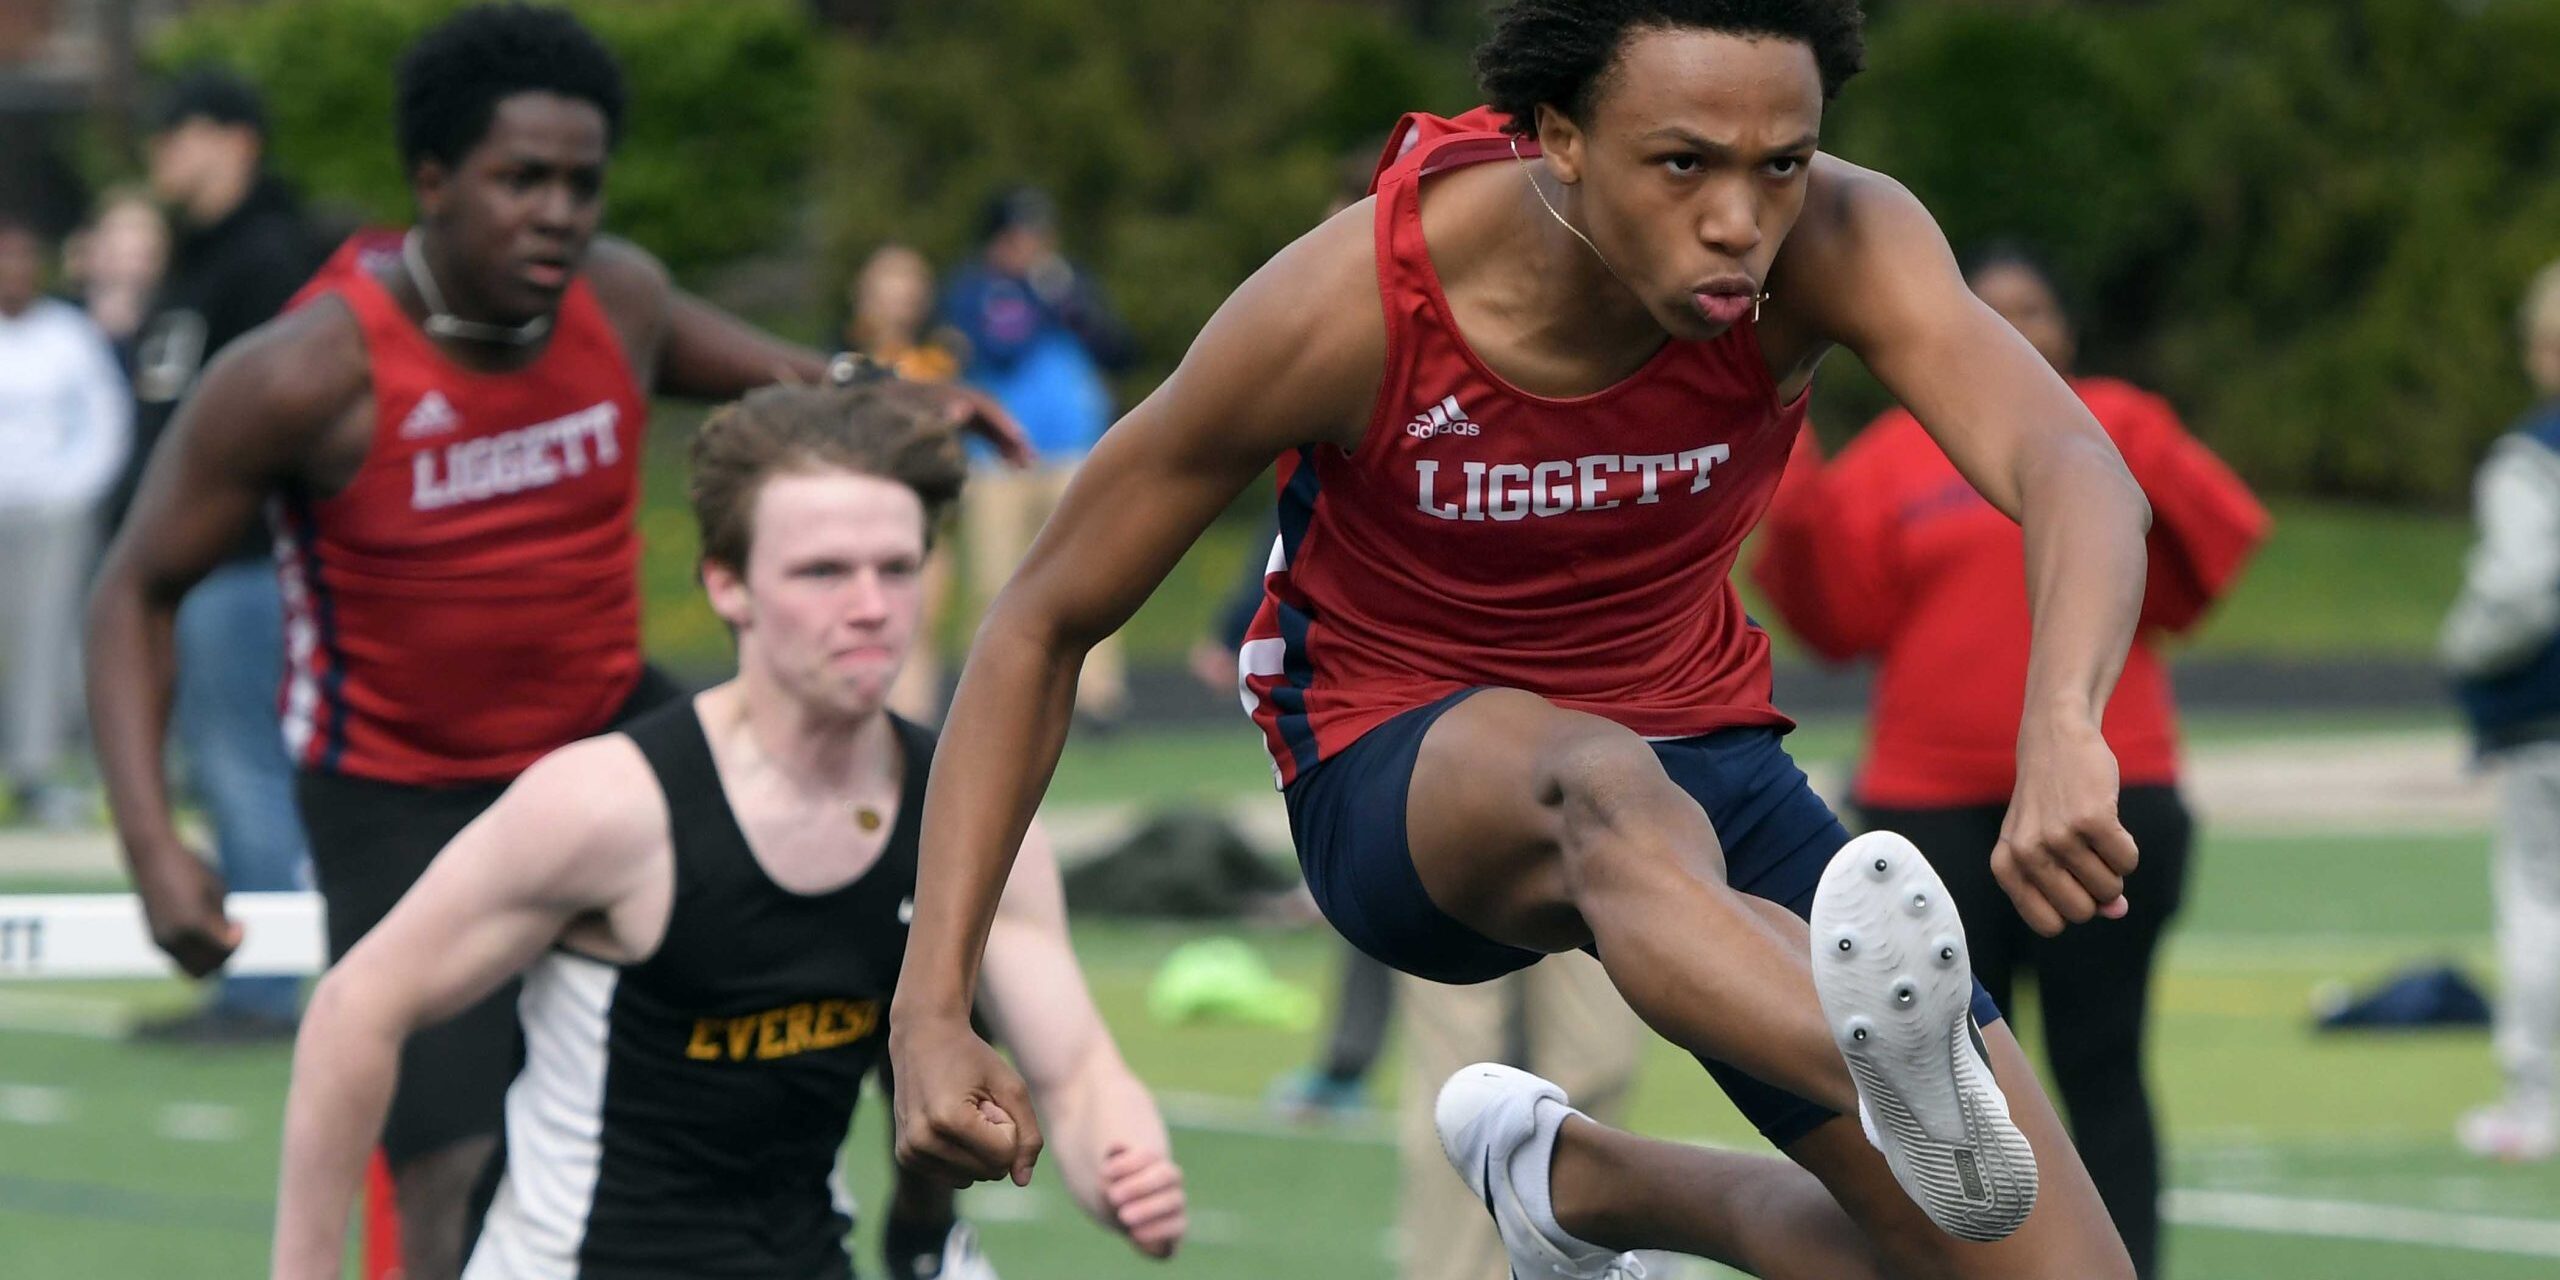 Upper School track and field